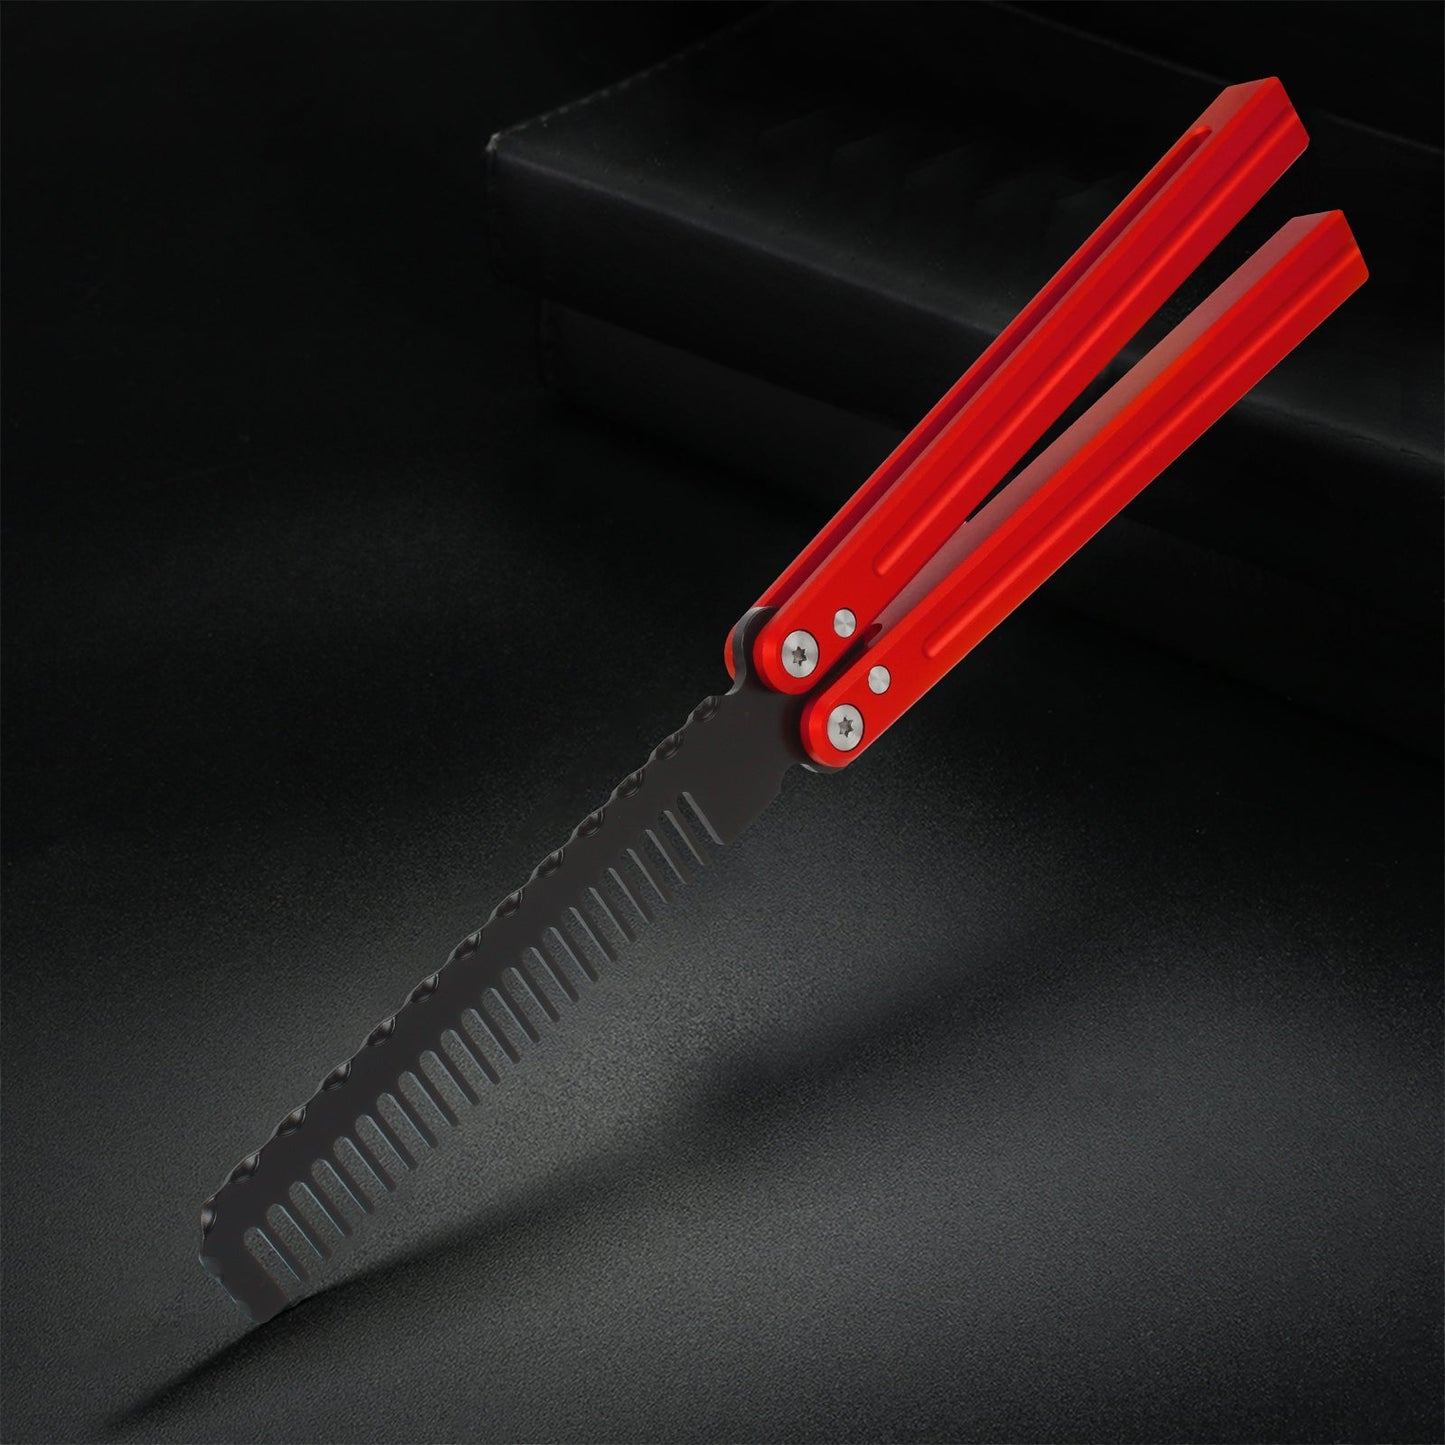 Andux 7075 Aluminum Balisong Butterfly Knife Comb CNC Effective Bushing System Training Tool Lock Free (Red) CNC-S01